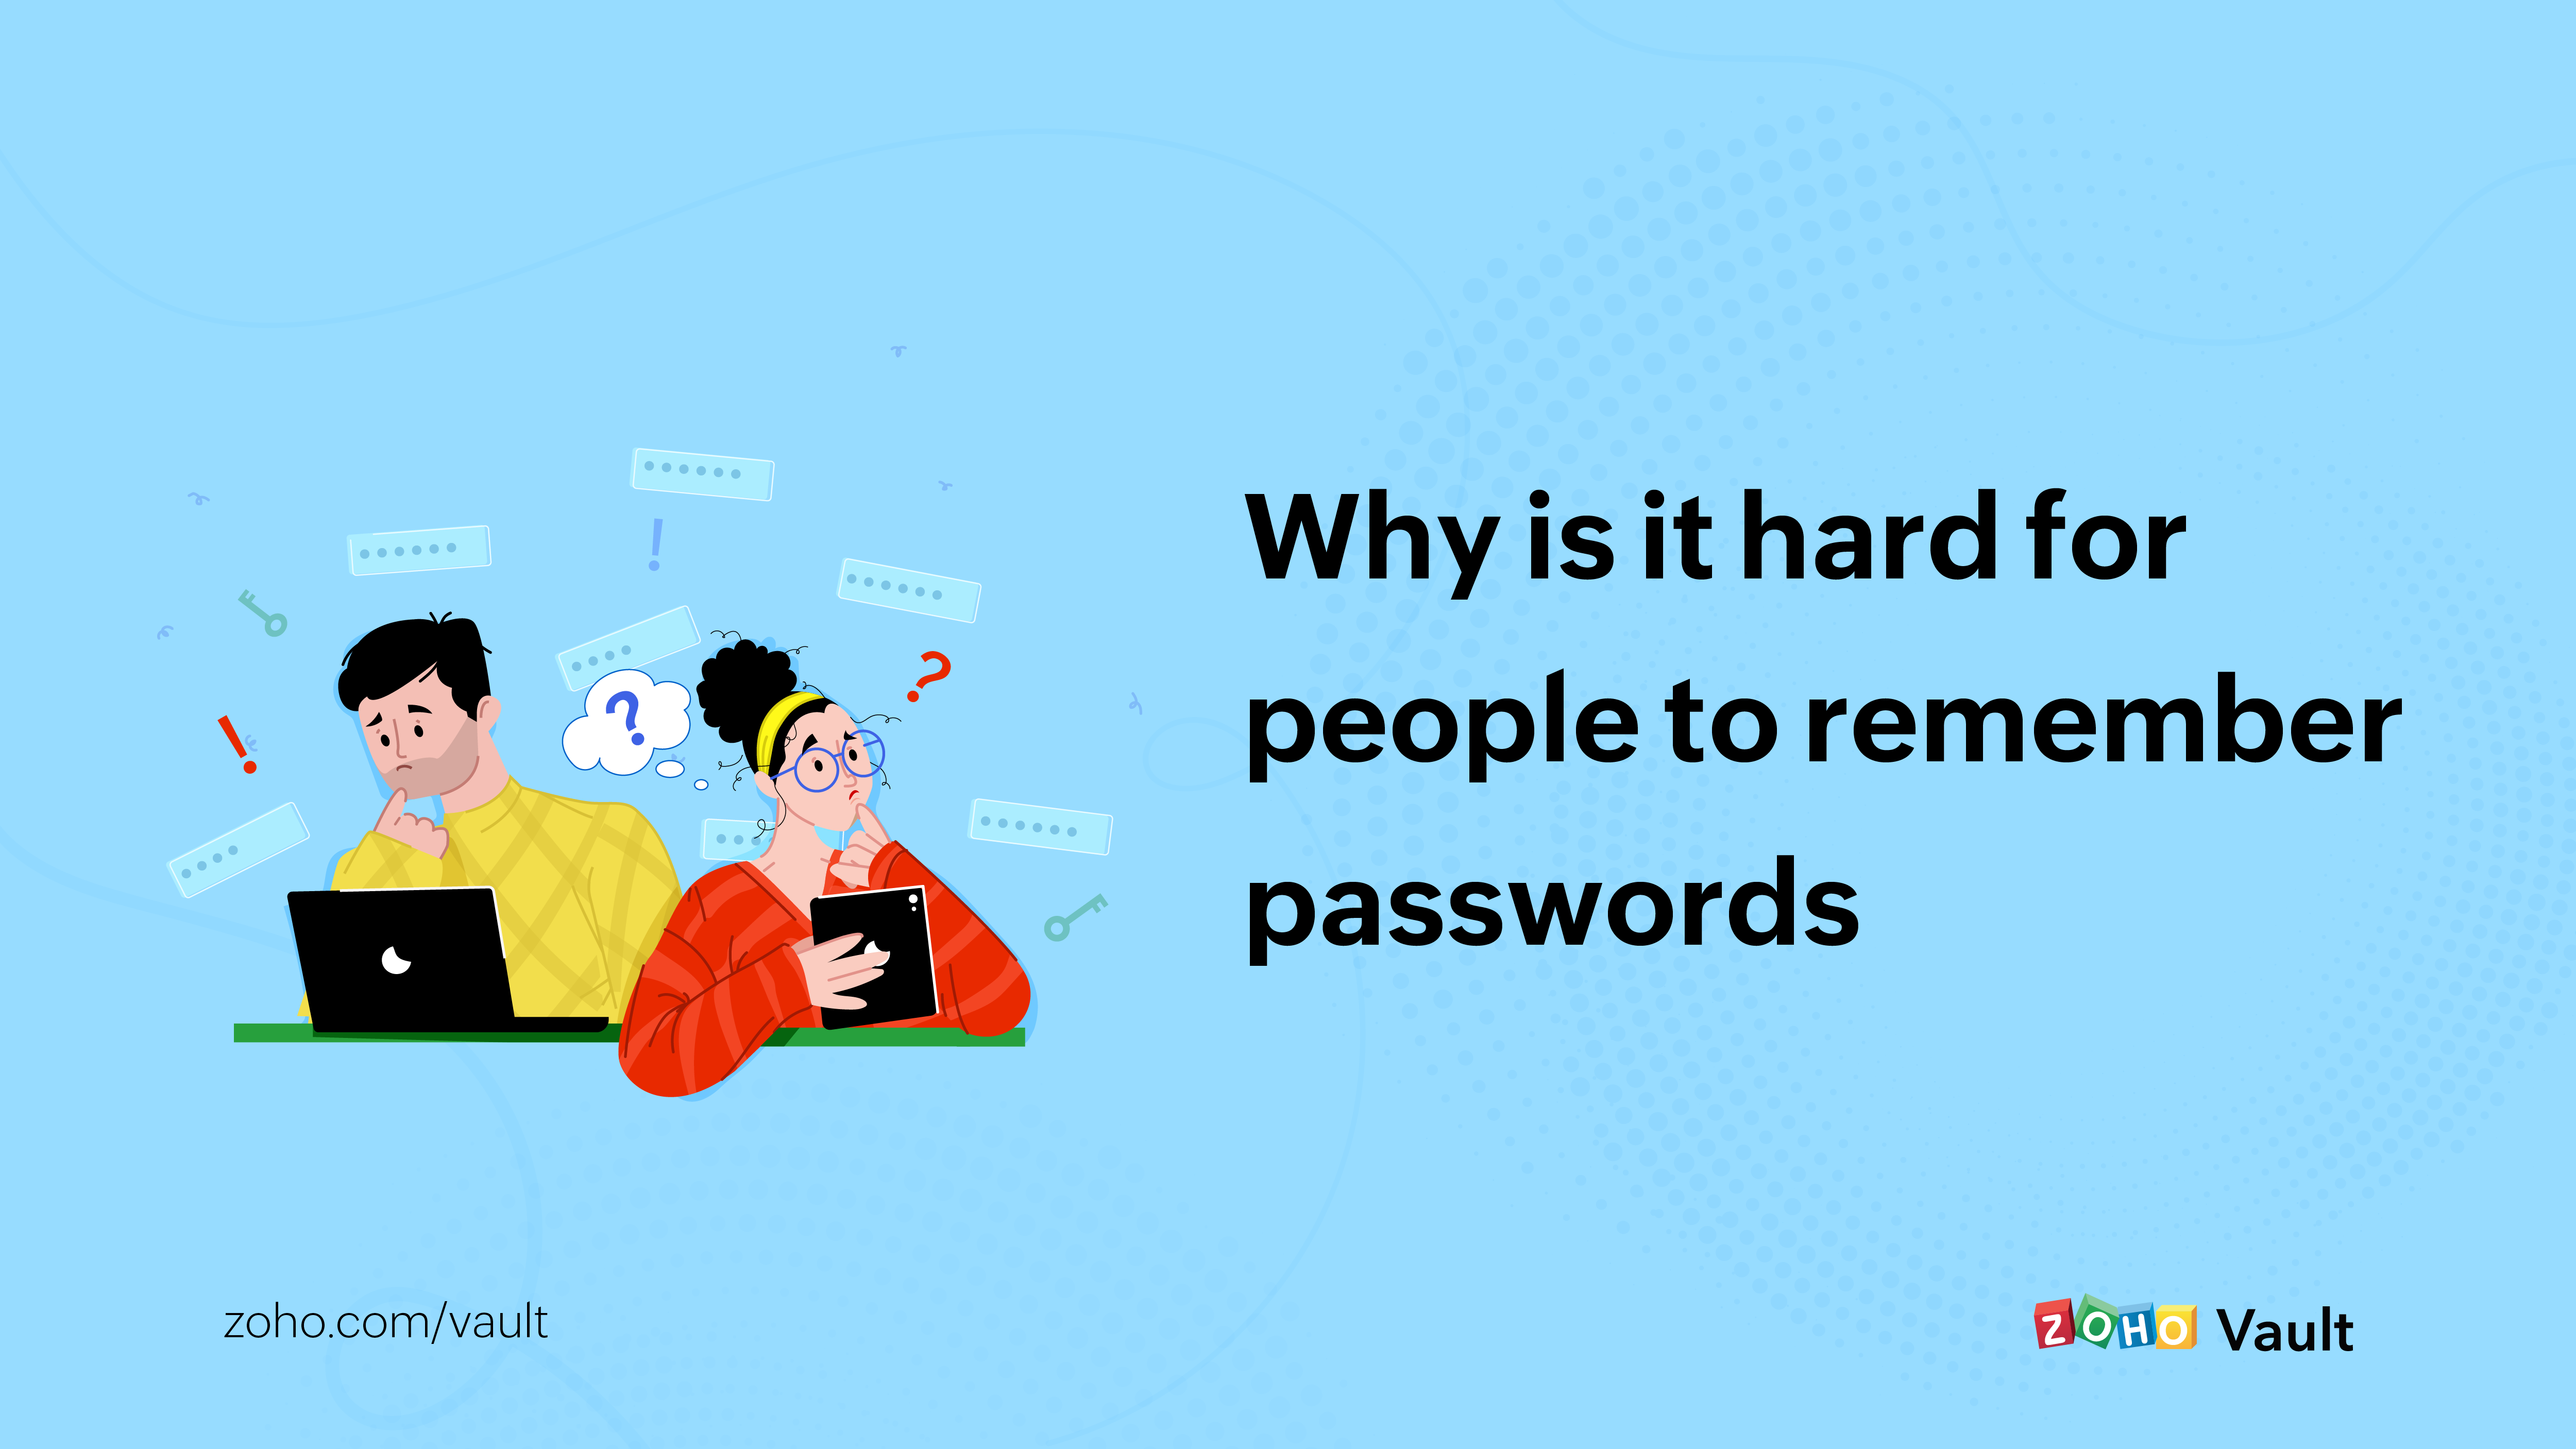 Why is it so hard for people to remember passwords?